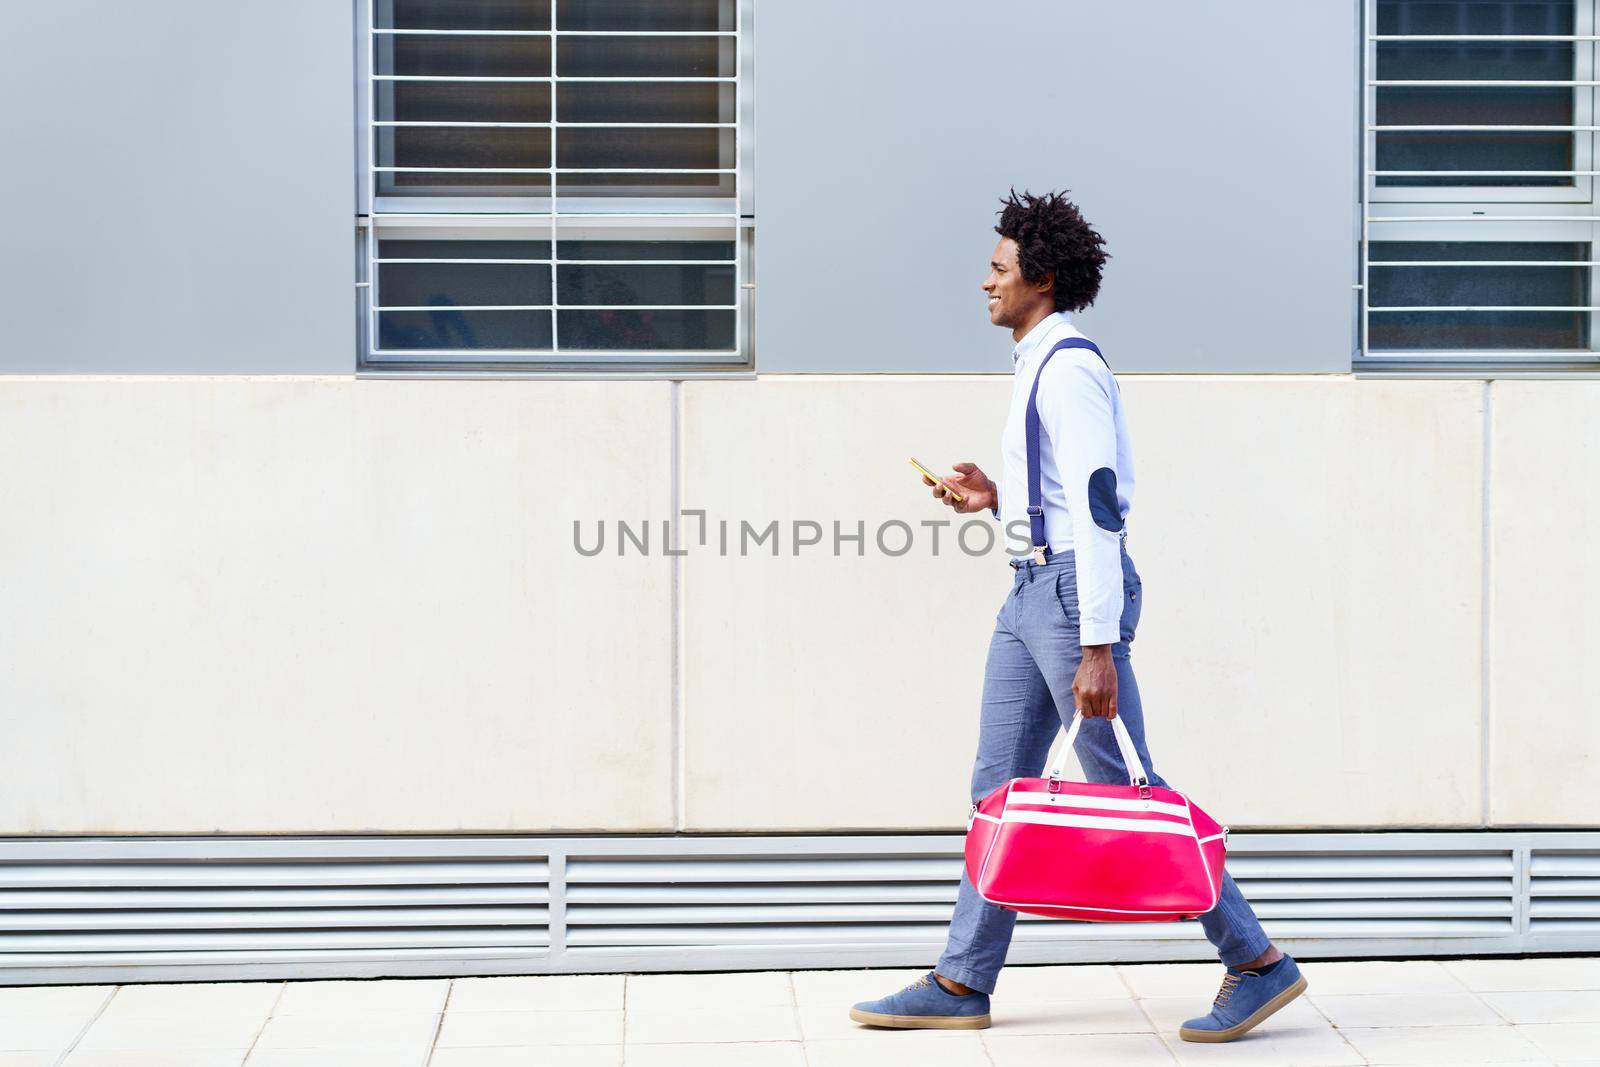 Black man with afro hairstyle carrying a sports bag and smartphone in urban background. Guy with curly hair wearing shirt and suspenders.